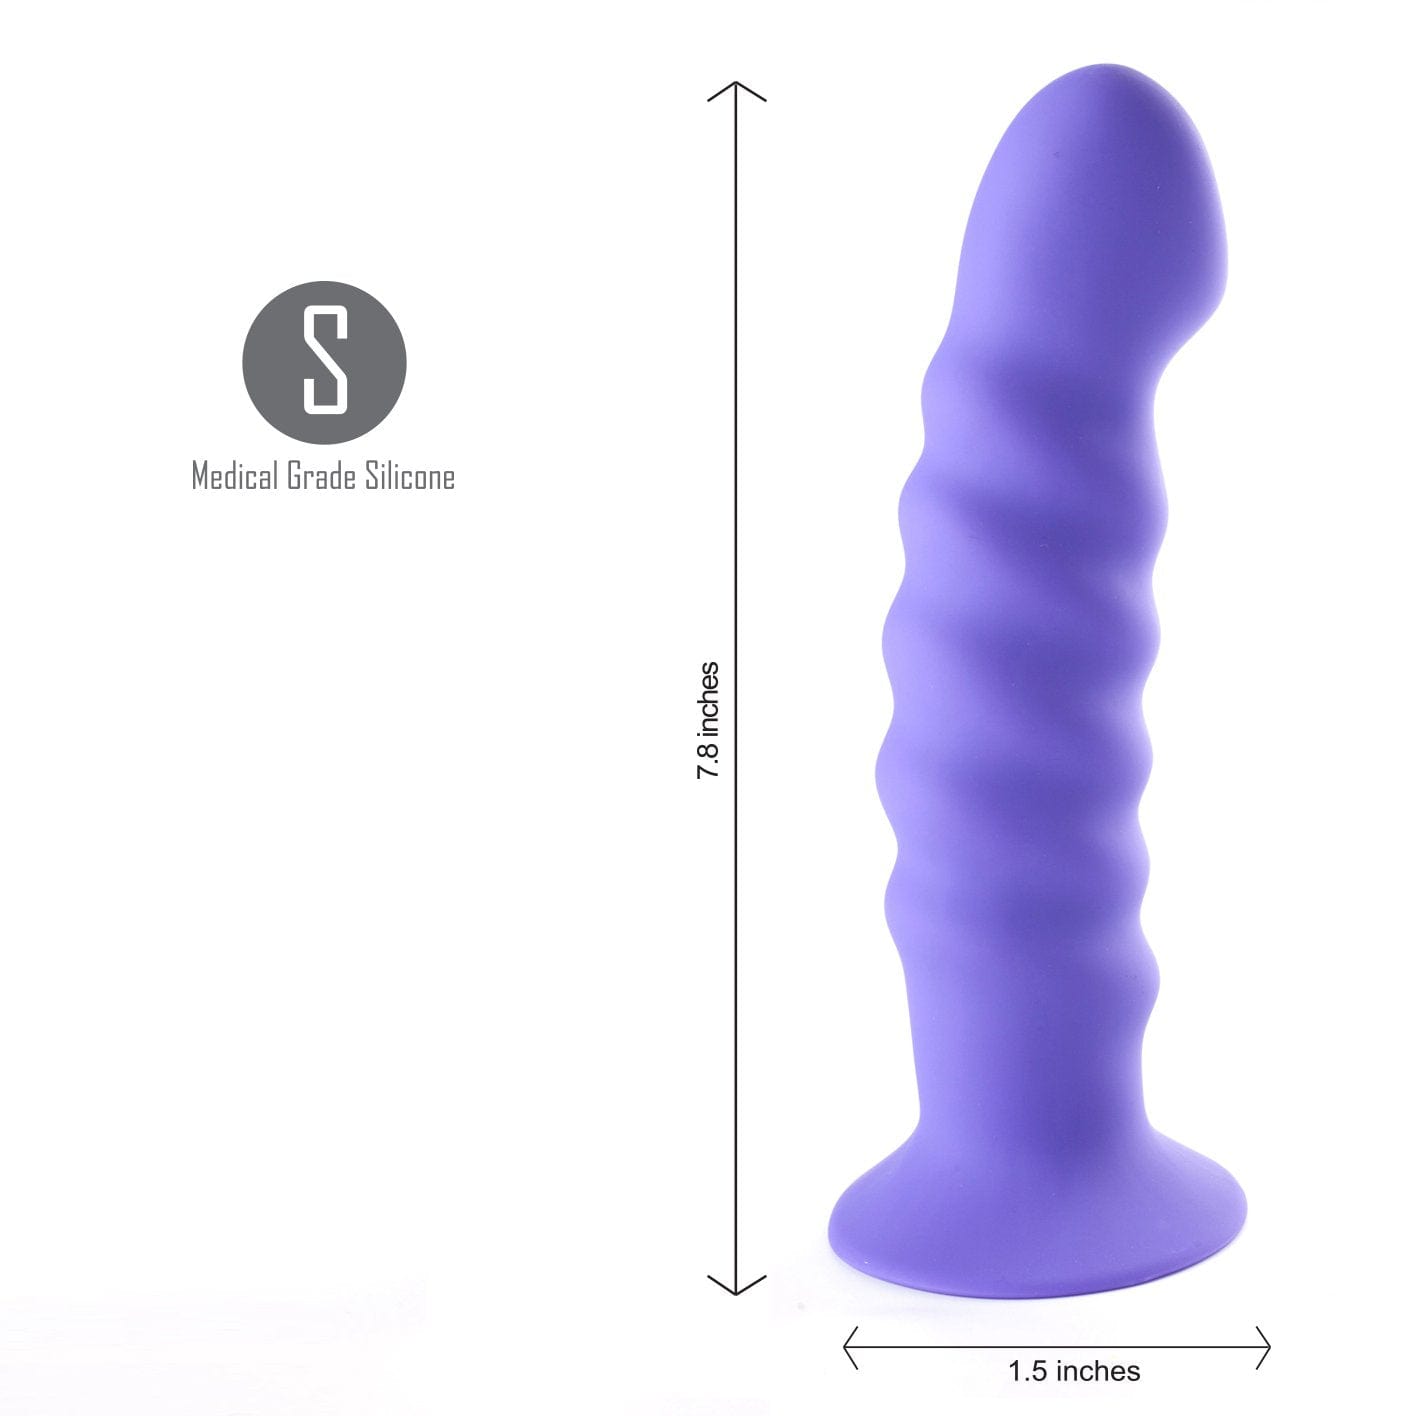 Maia Toys DONGS Purple Maia Kendall -  20 cm Dong 5060311470133